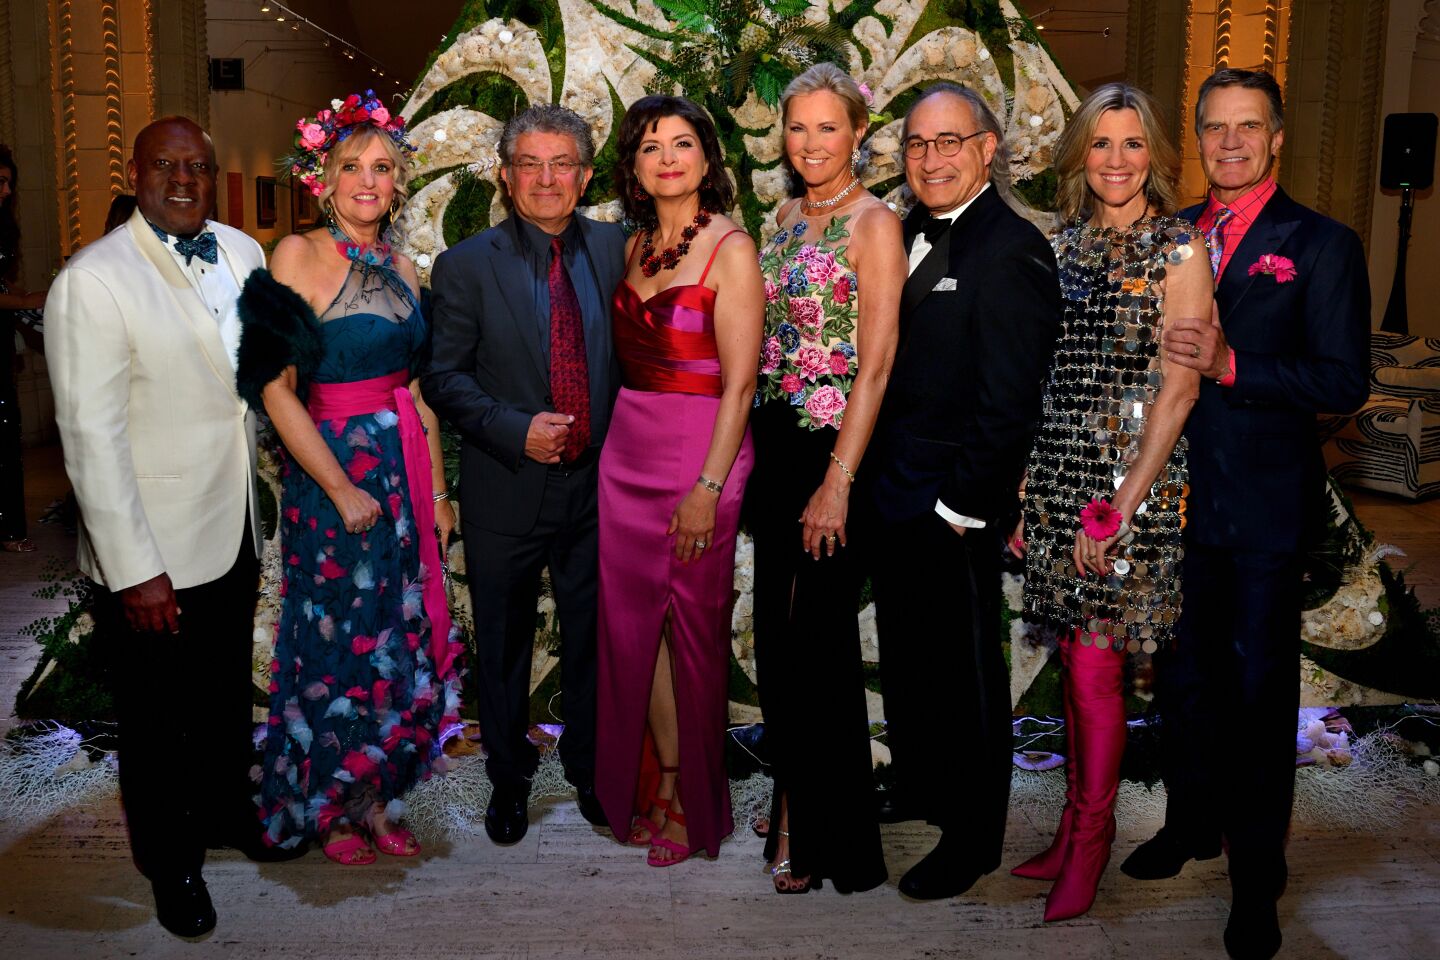 “Bloom Bash” chairs and their spouses Mitch and Rebecca Mitchell, Fred Khoroushi, Gita Khadiri, Micki Olin, Dr. Reid Abrams and Robin and Gordon Carrier